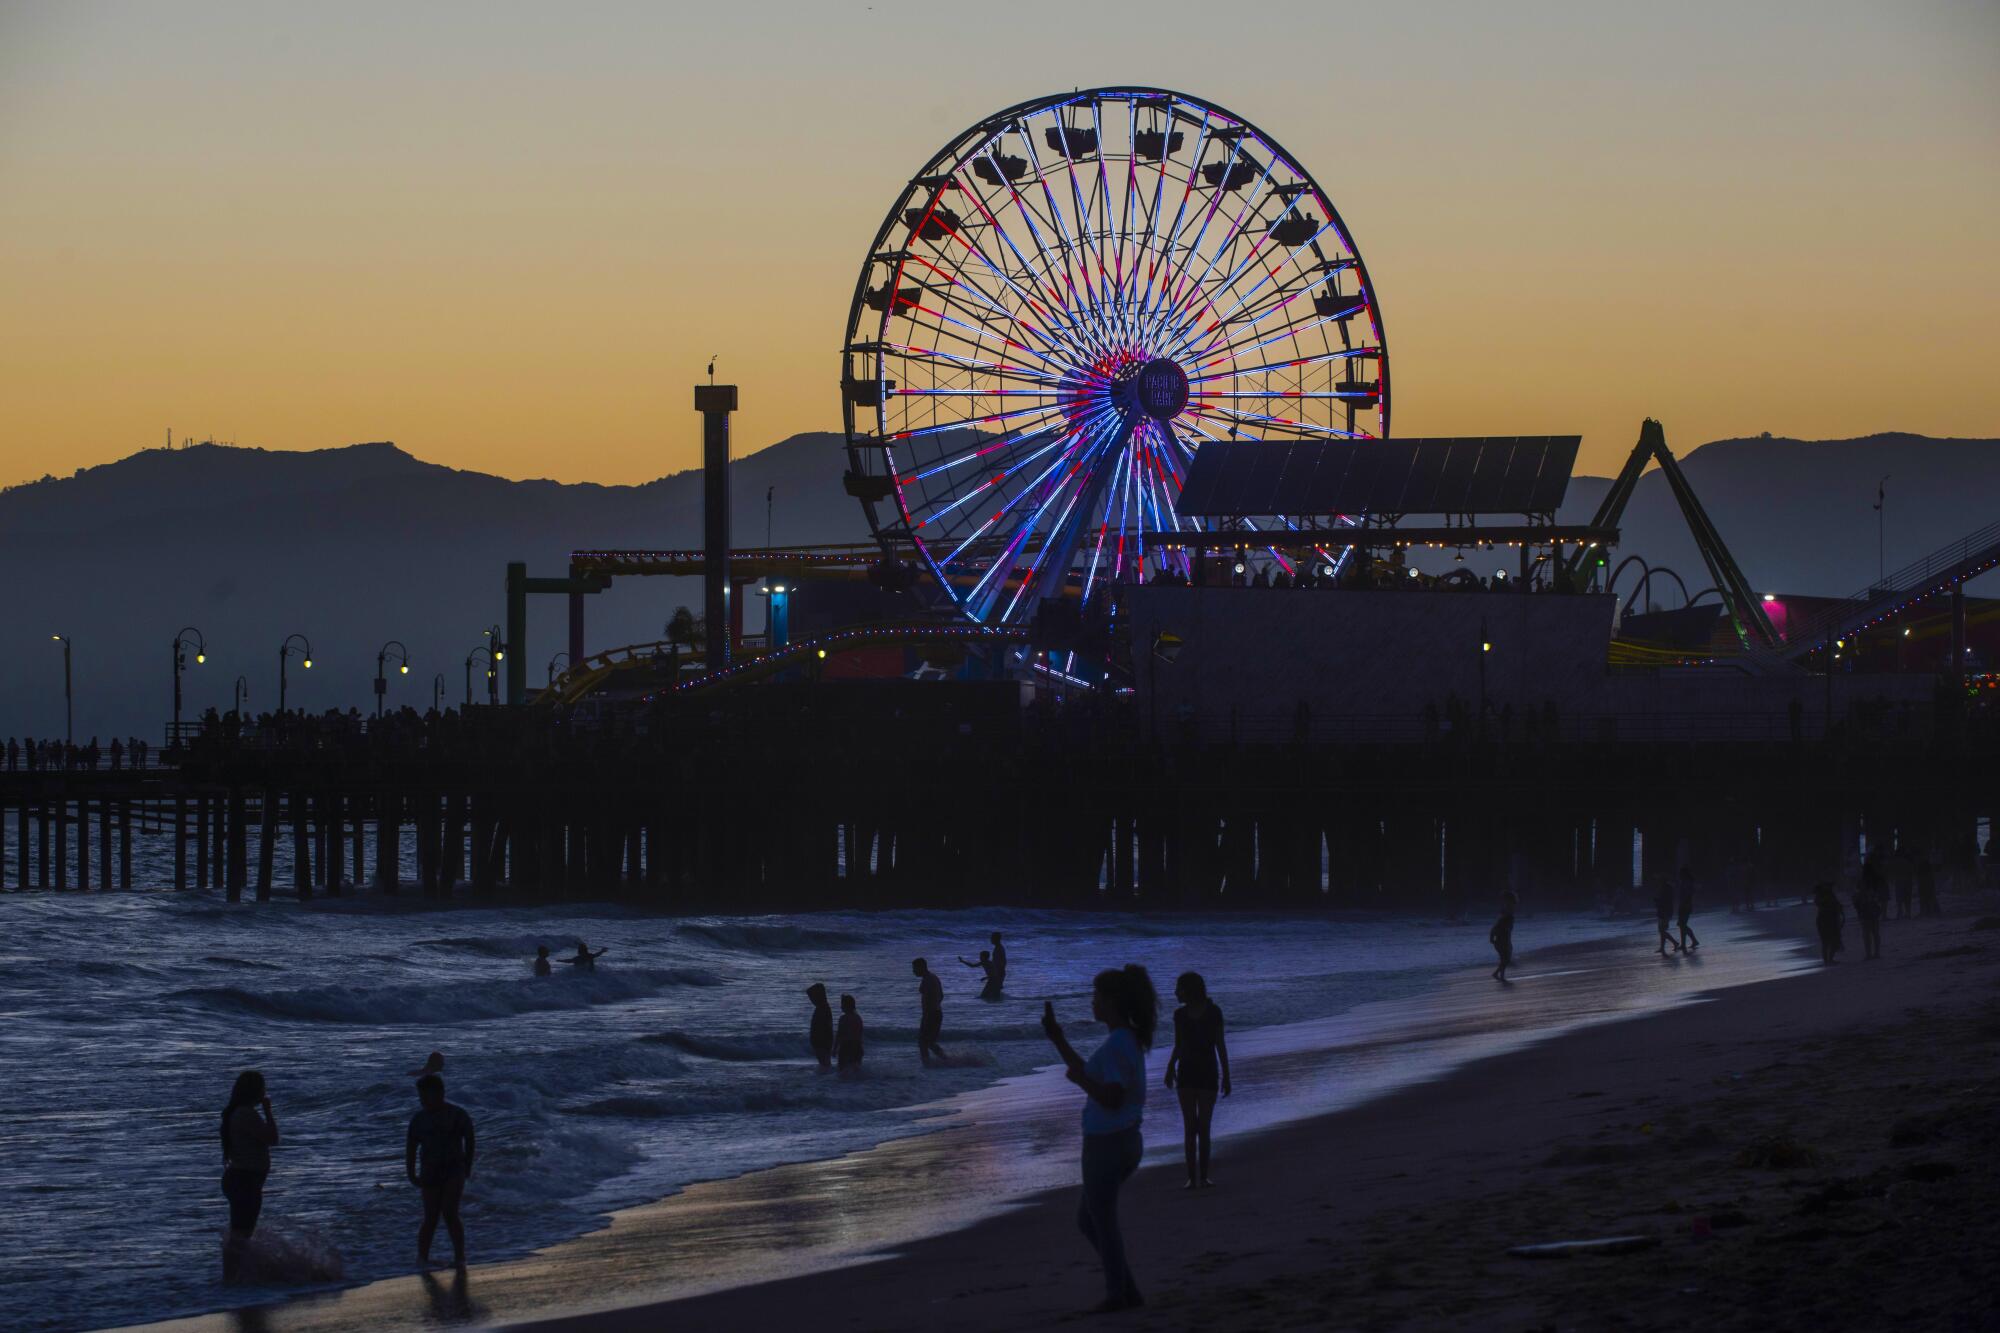 People on the beach and in the water near a Ferris wheel and pier